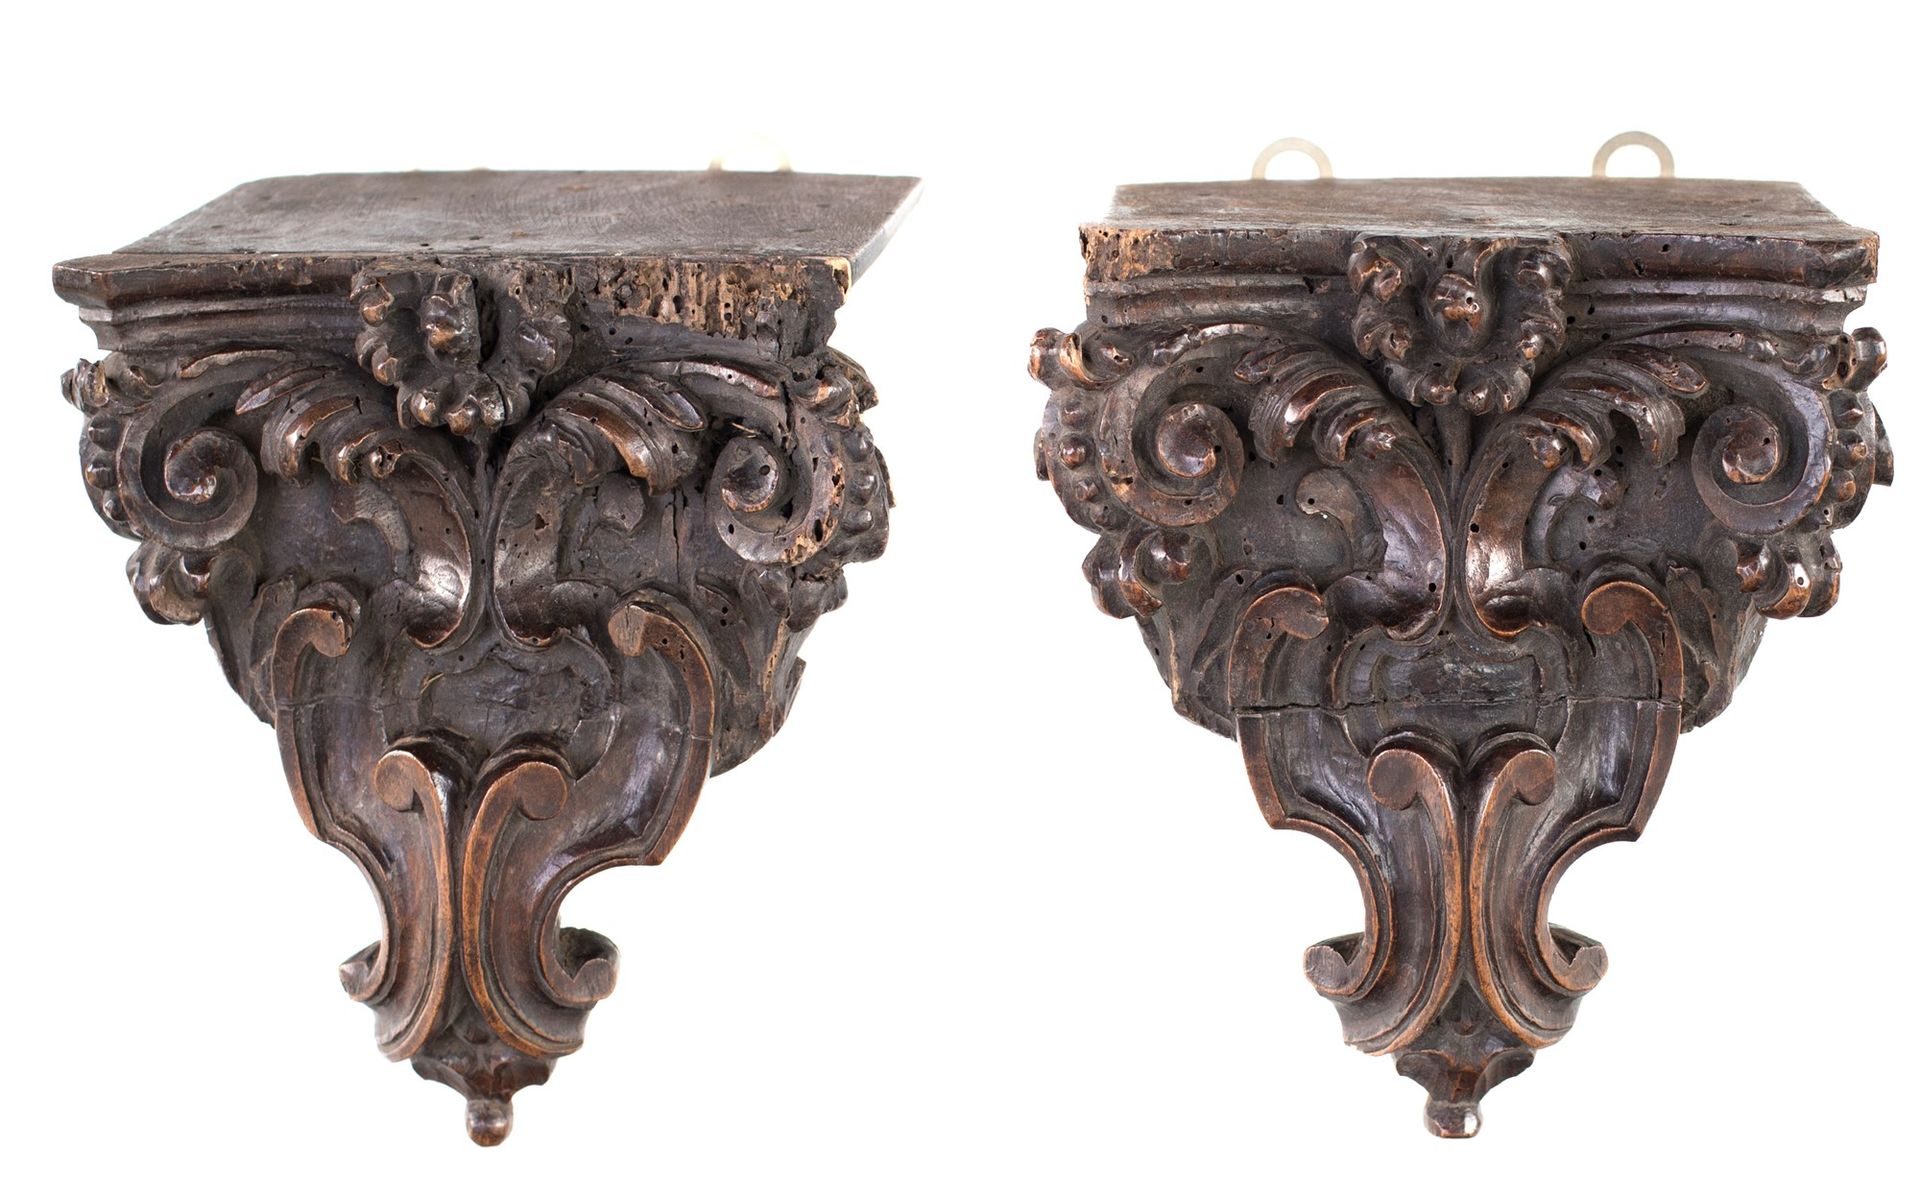 Pair of teardrop shelves in carved wood, 17th century characterized by plant rel&hellip;